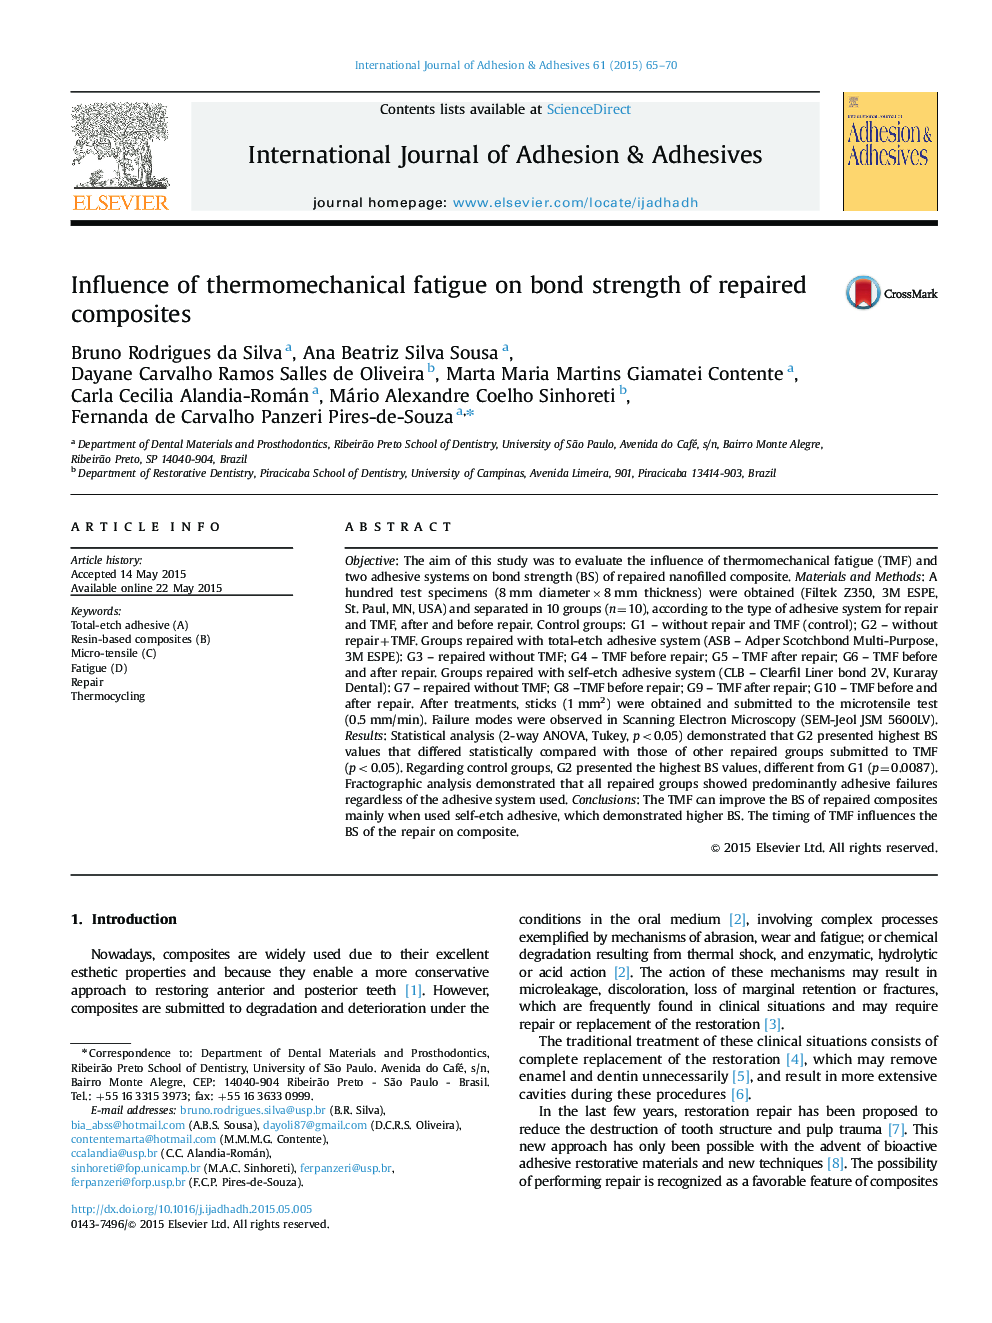 Influence of thermomechanical fatigue on bond strength of repaired composites